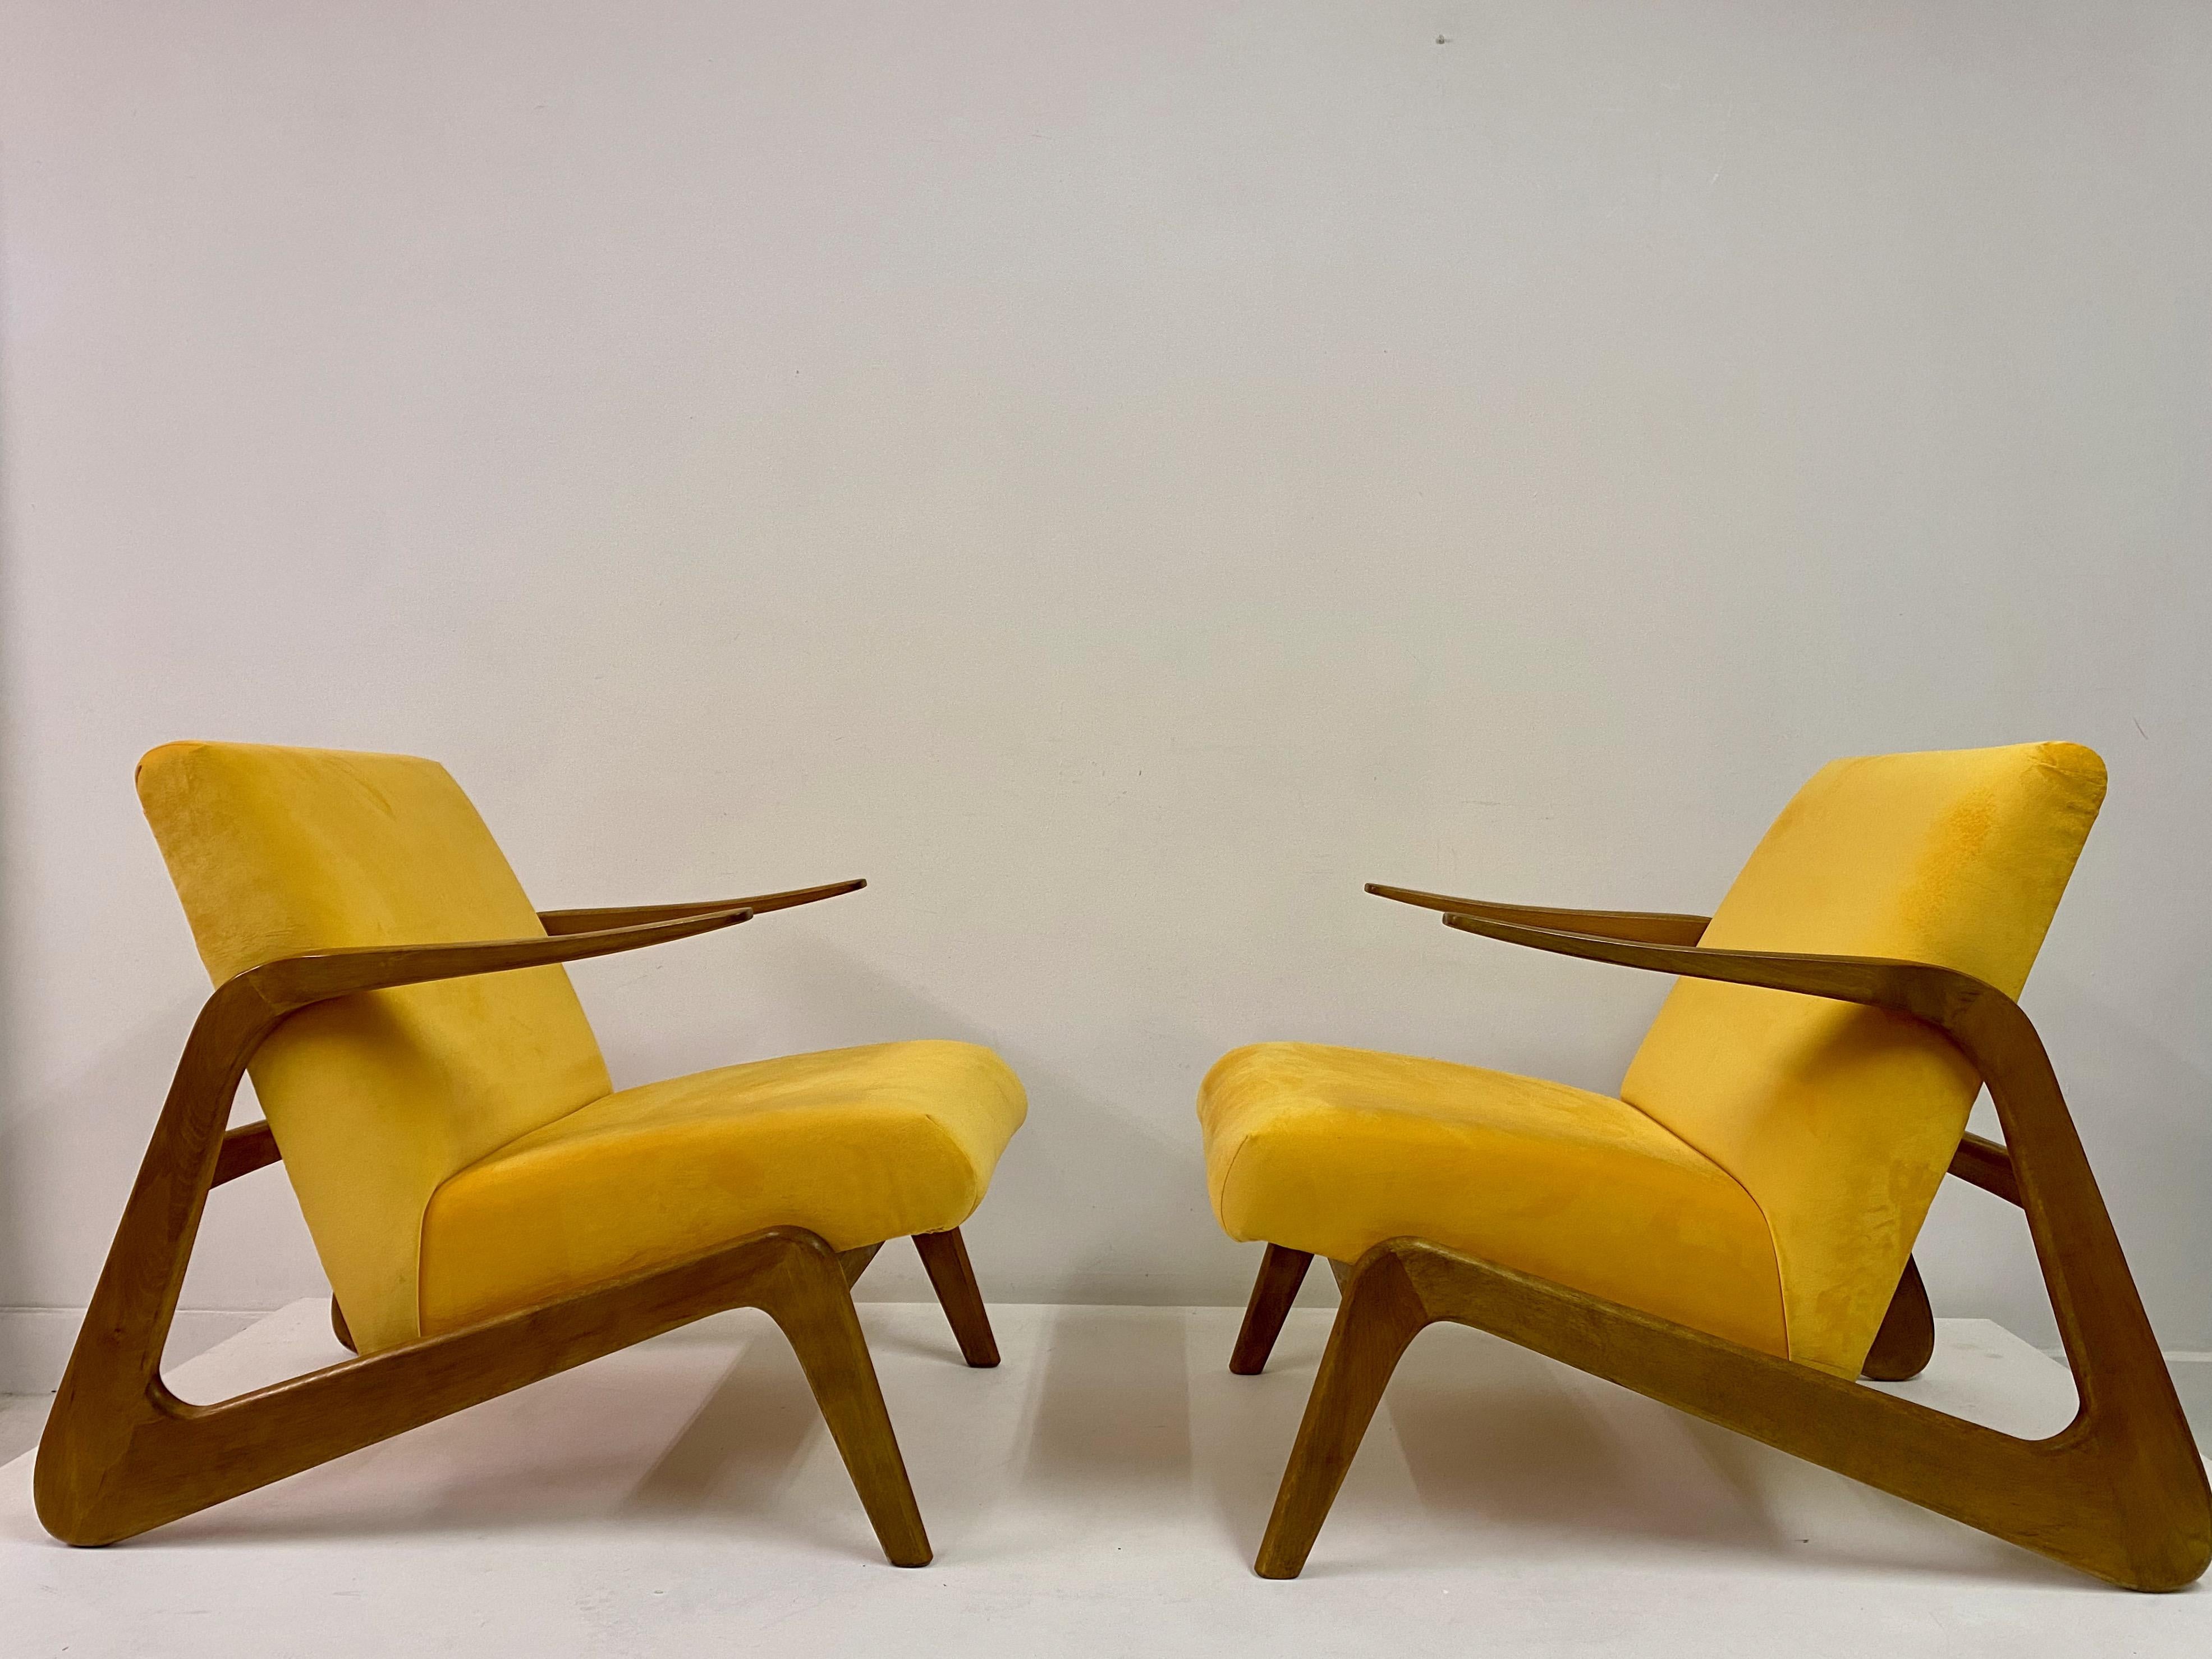 Pair of Contemporary Italian Armchairs in Yellow Velvet In New Condition For Sale In London, London